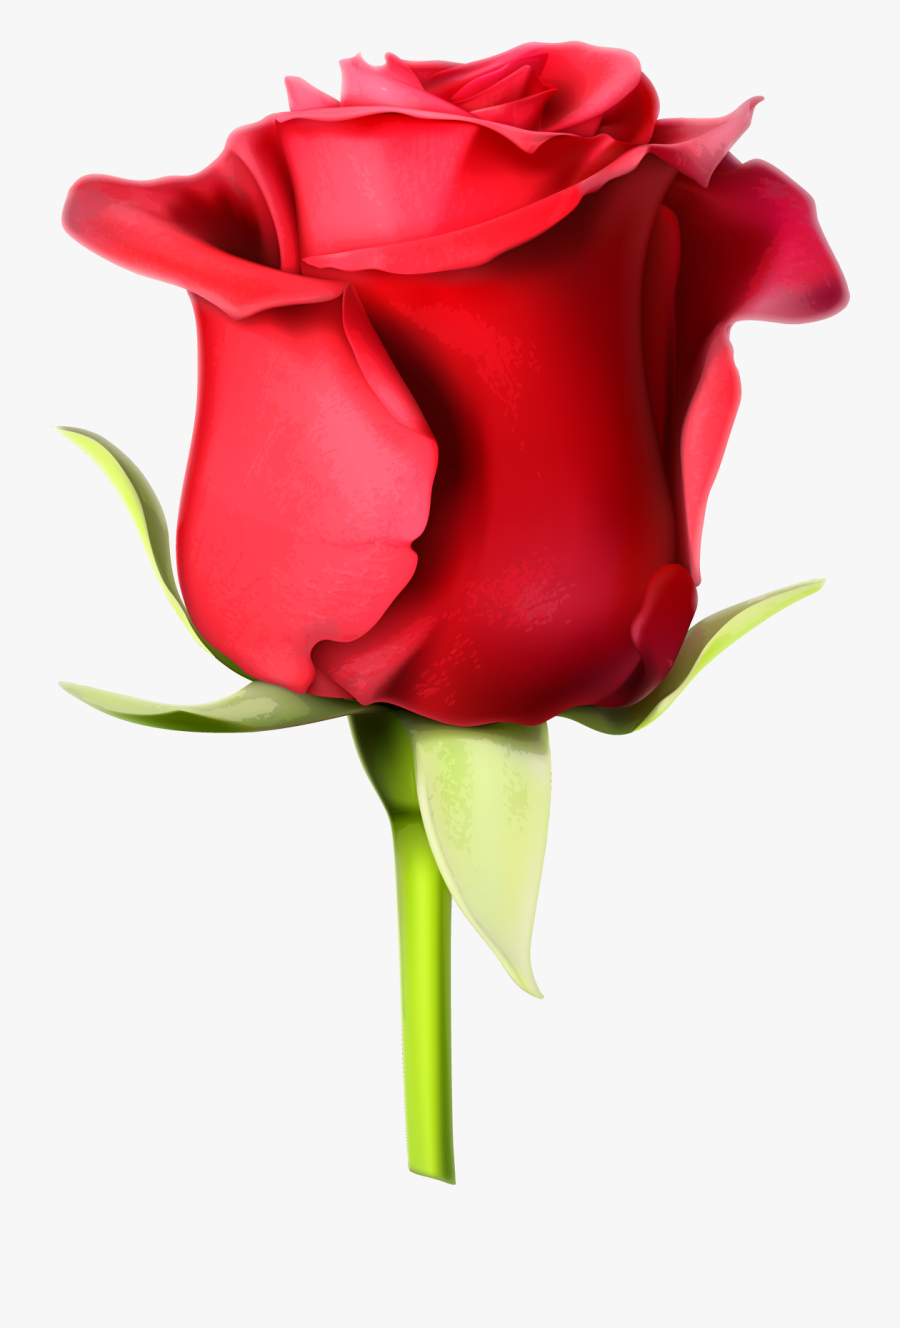 Rose Images Hd Download Clipart , Png Download - Full Hd Rose Image Download, Transparent Clipart